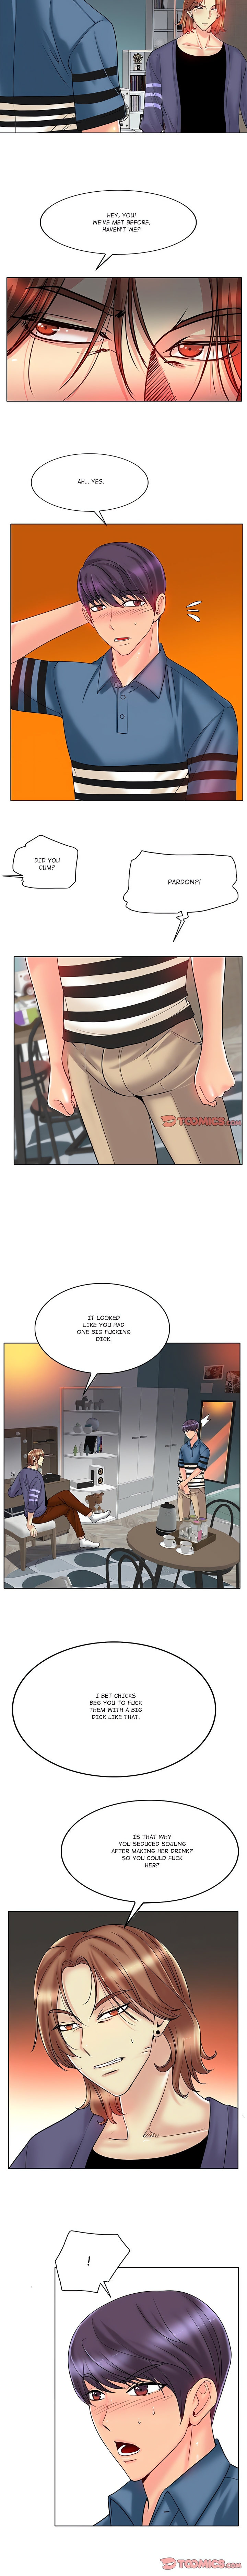 Hole in One - Chapter 26 Page 4